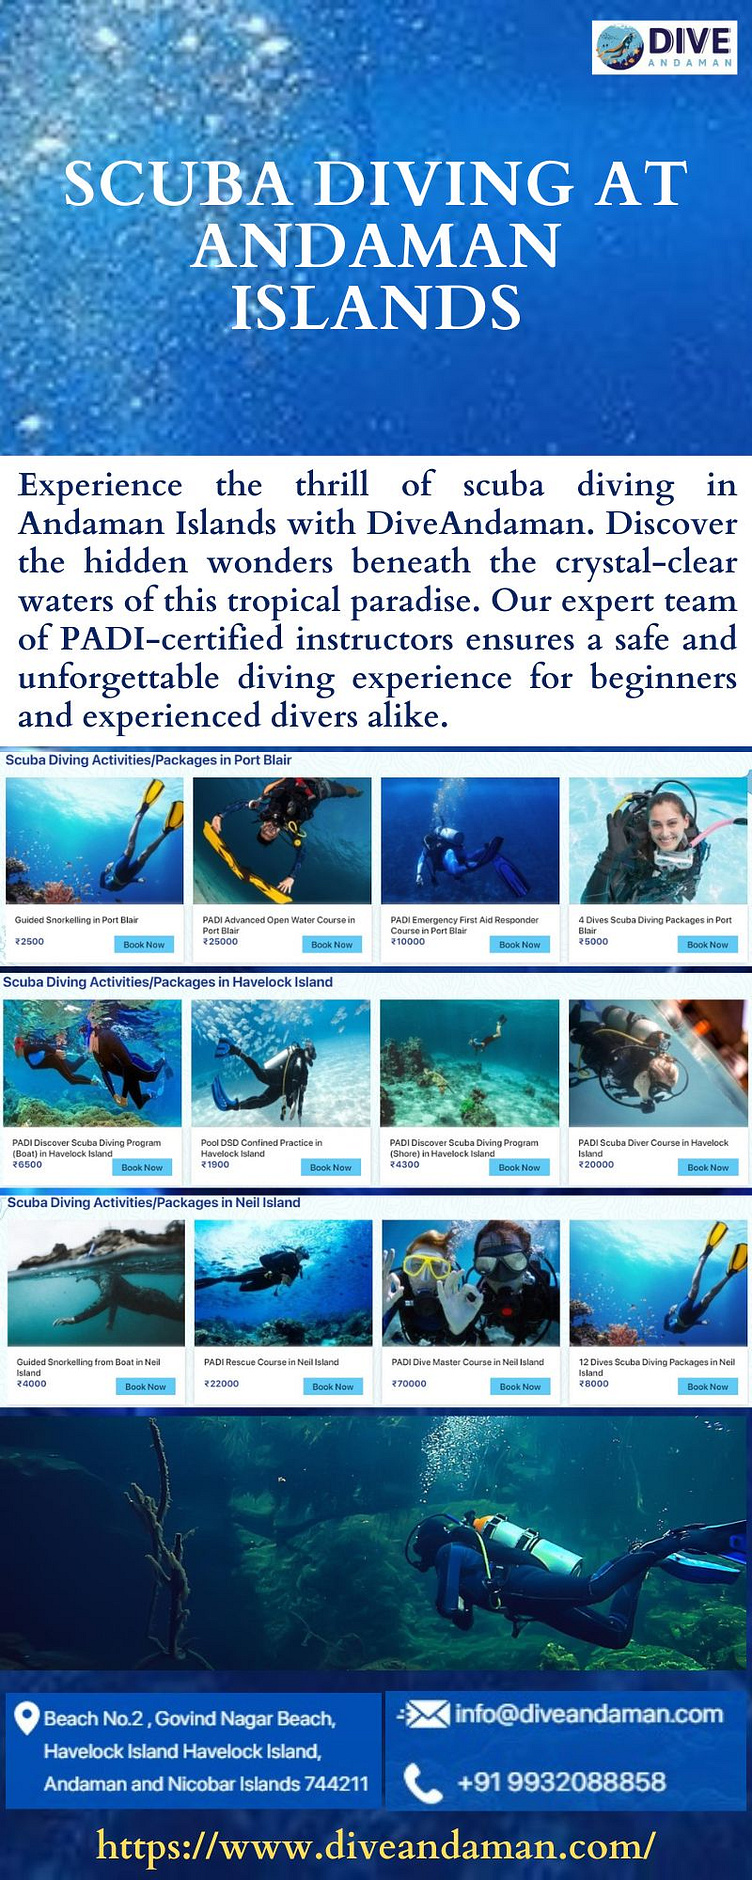 Exclusive Scuba Diving At Andaman Islands by Dive Andaman on Dribbble